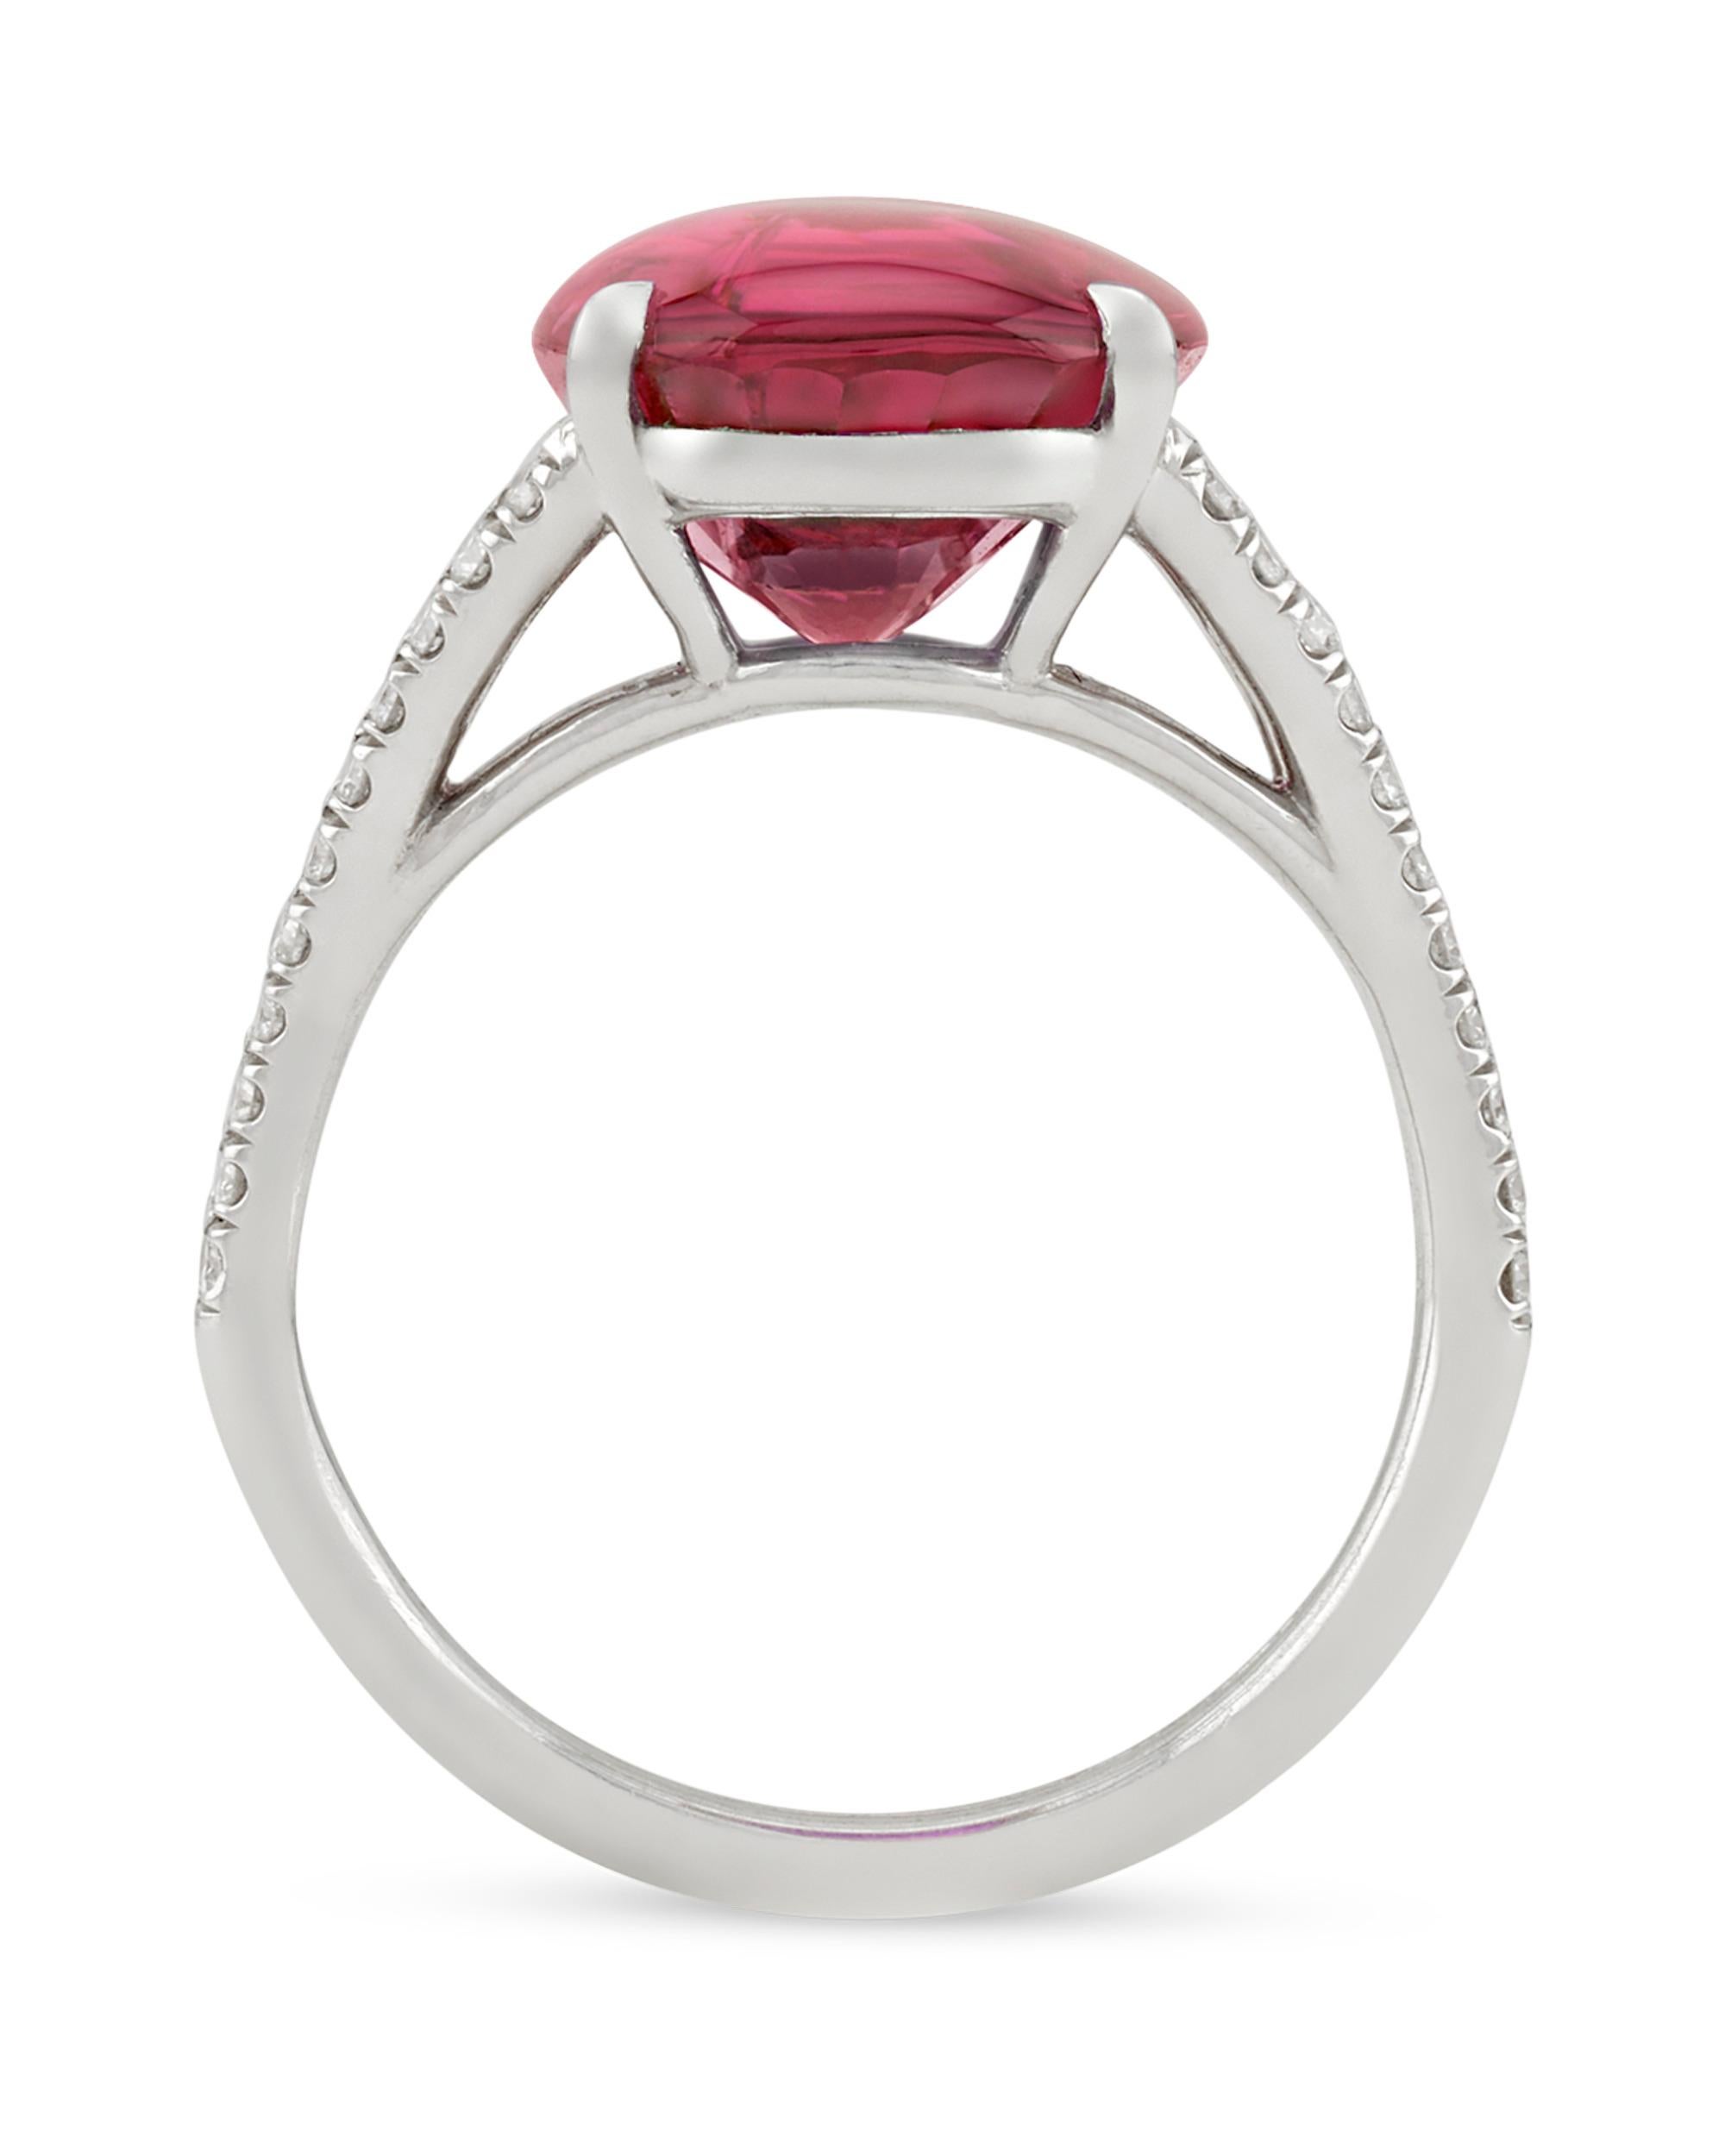 A stunning 8.03-carat cabochon ruby is at the center of this classic ring. The impressive gemstone earned an 